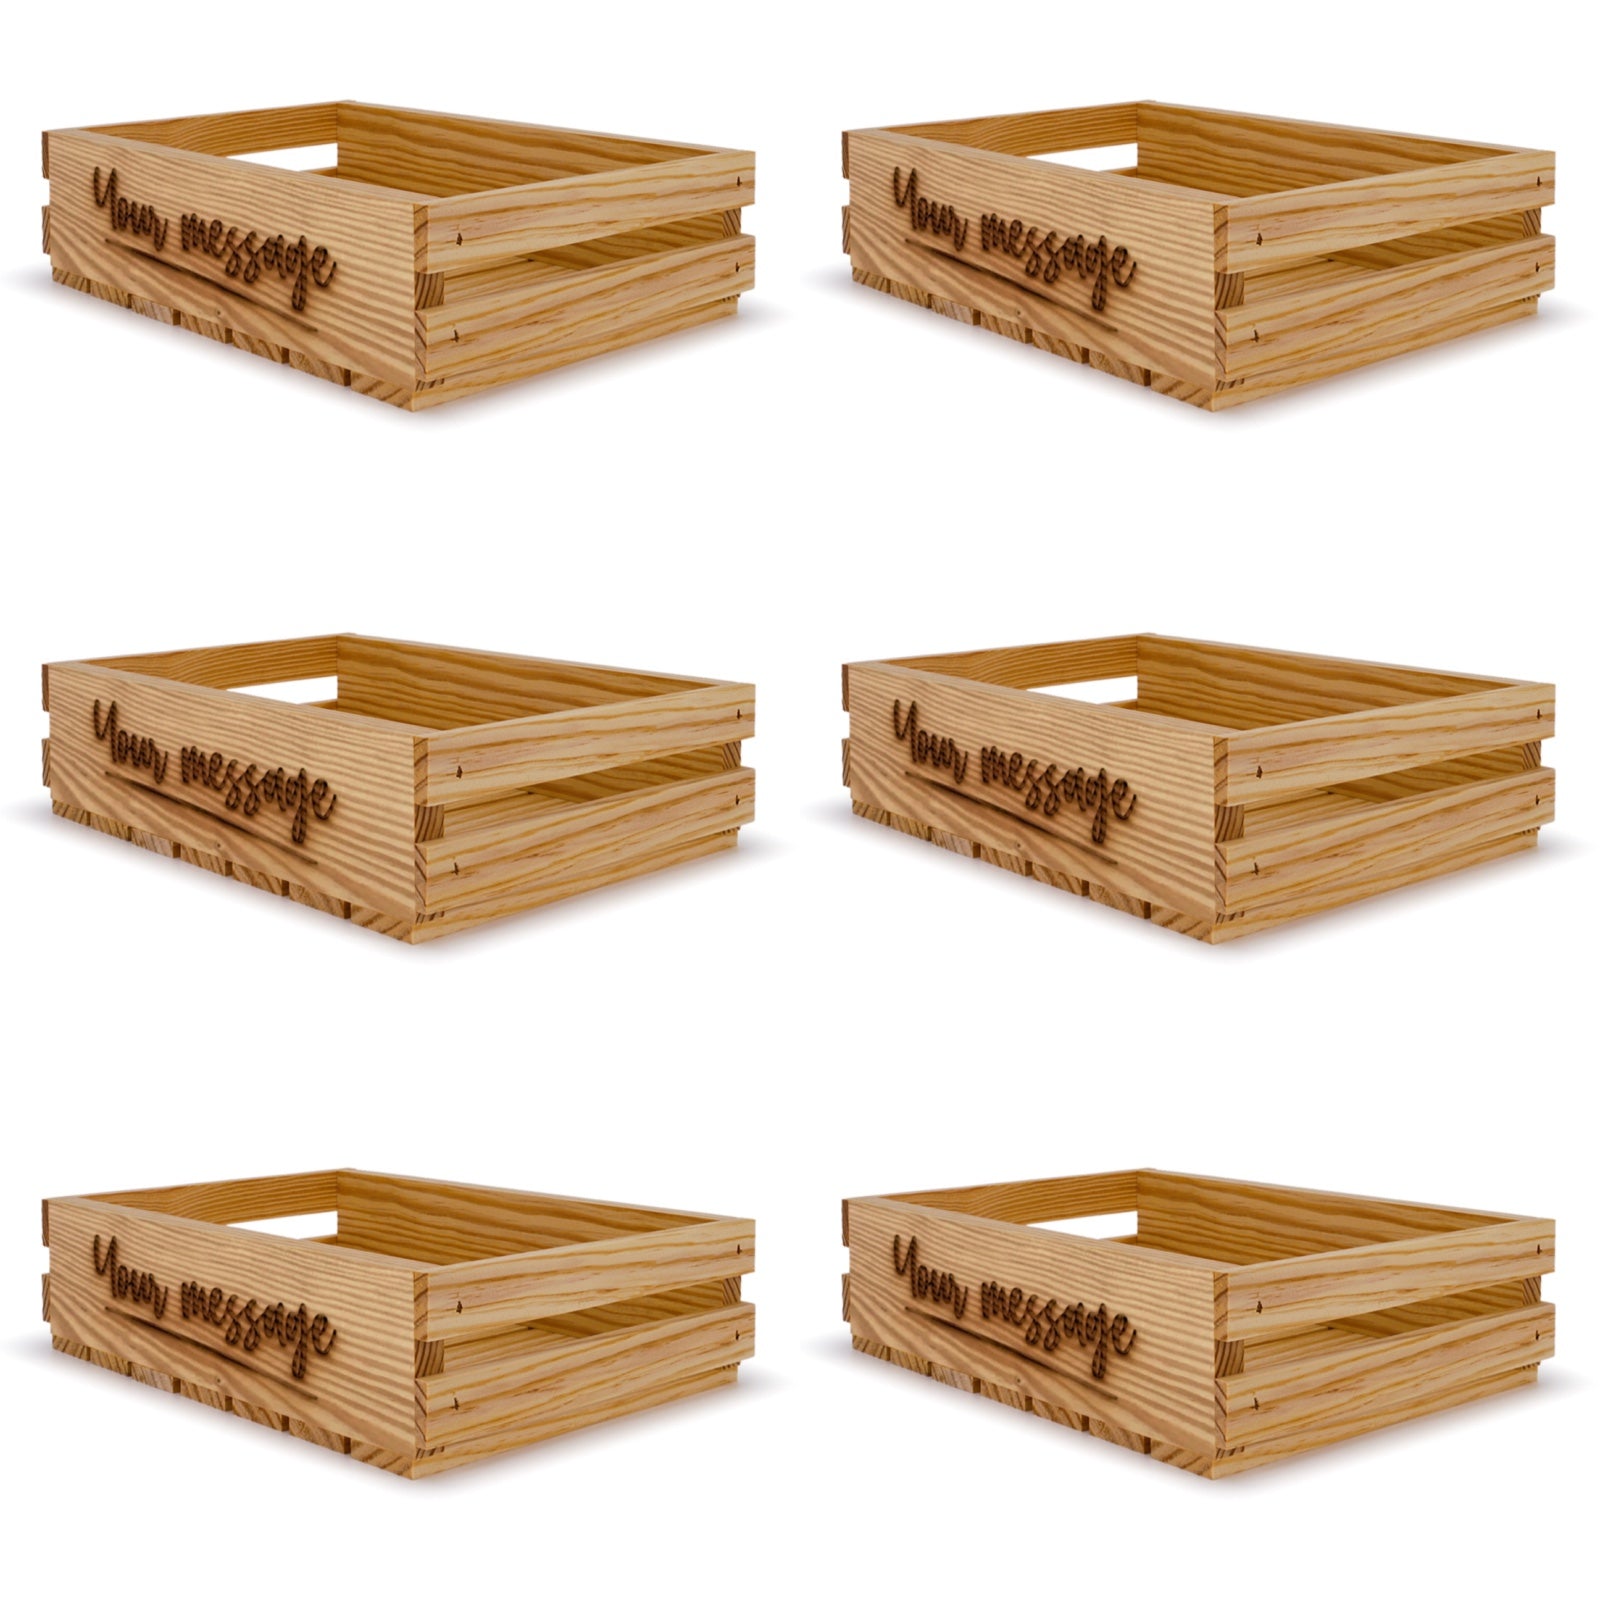 6 Small wooden crates 9x14x3.5 your message included